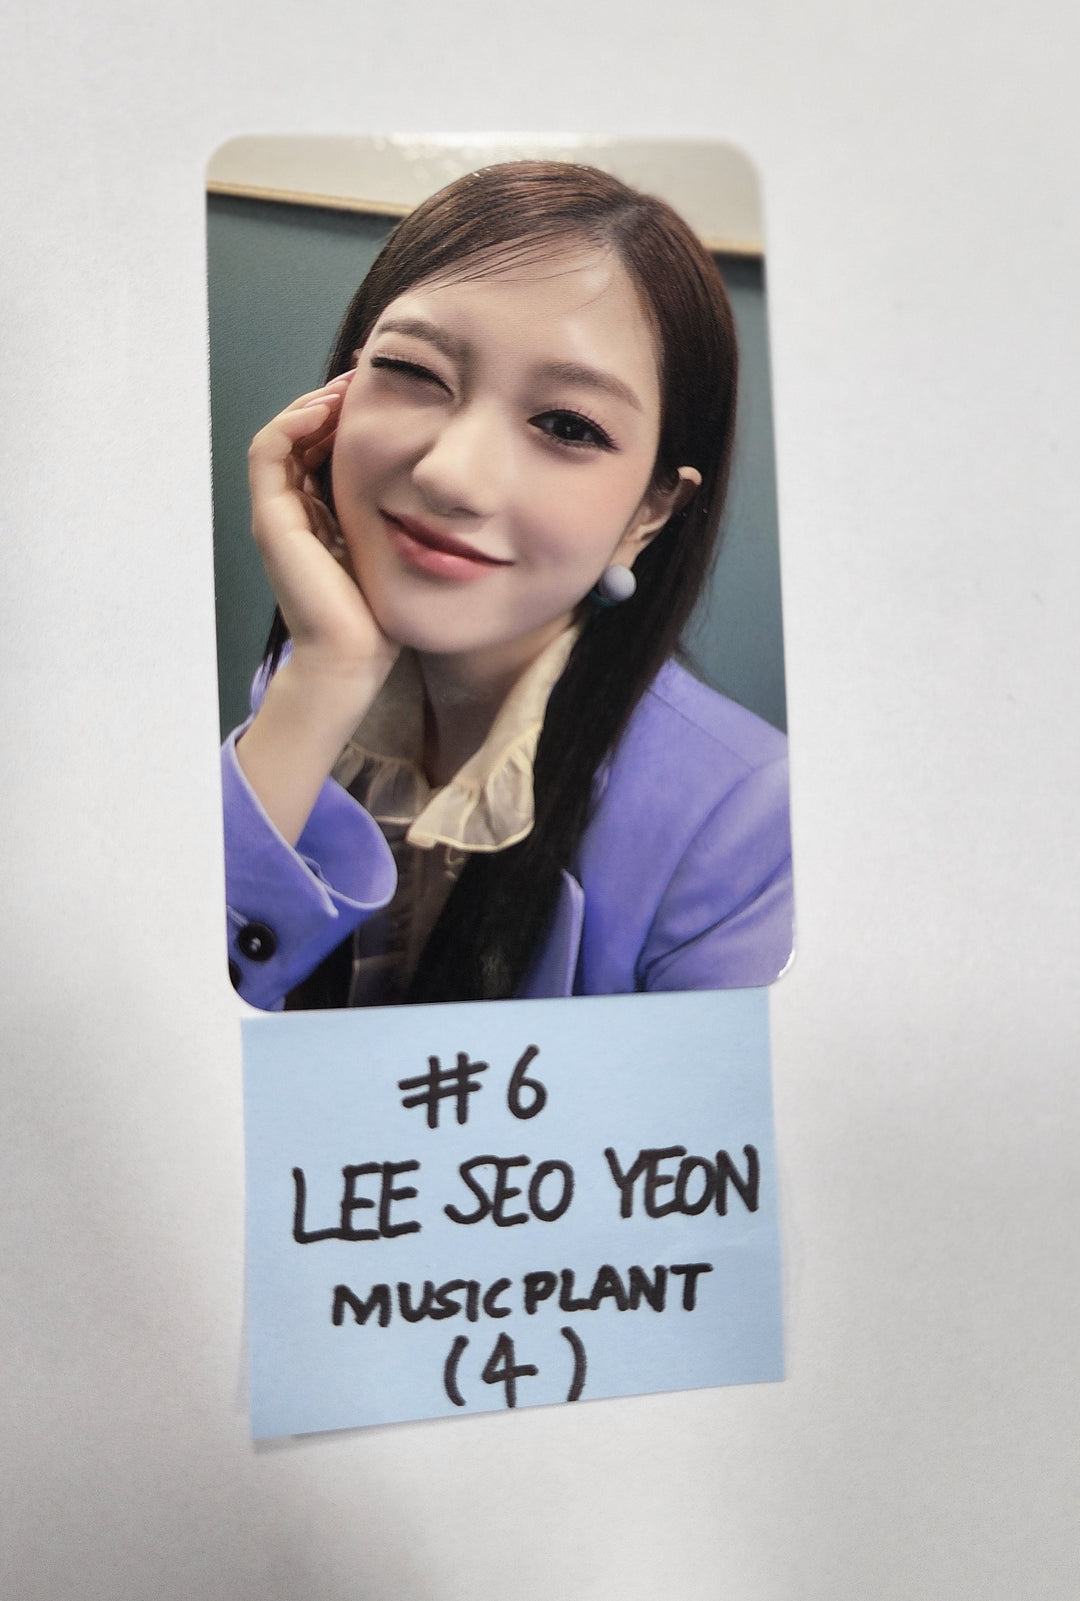 Fromis_9 "from our Memento Box" - Music Plant Pre-Order Benefit Photocard